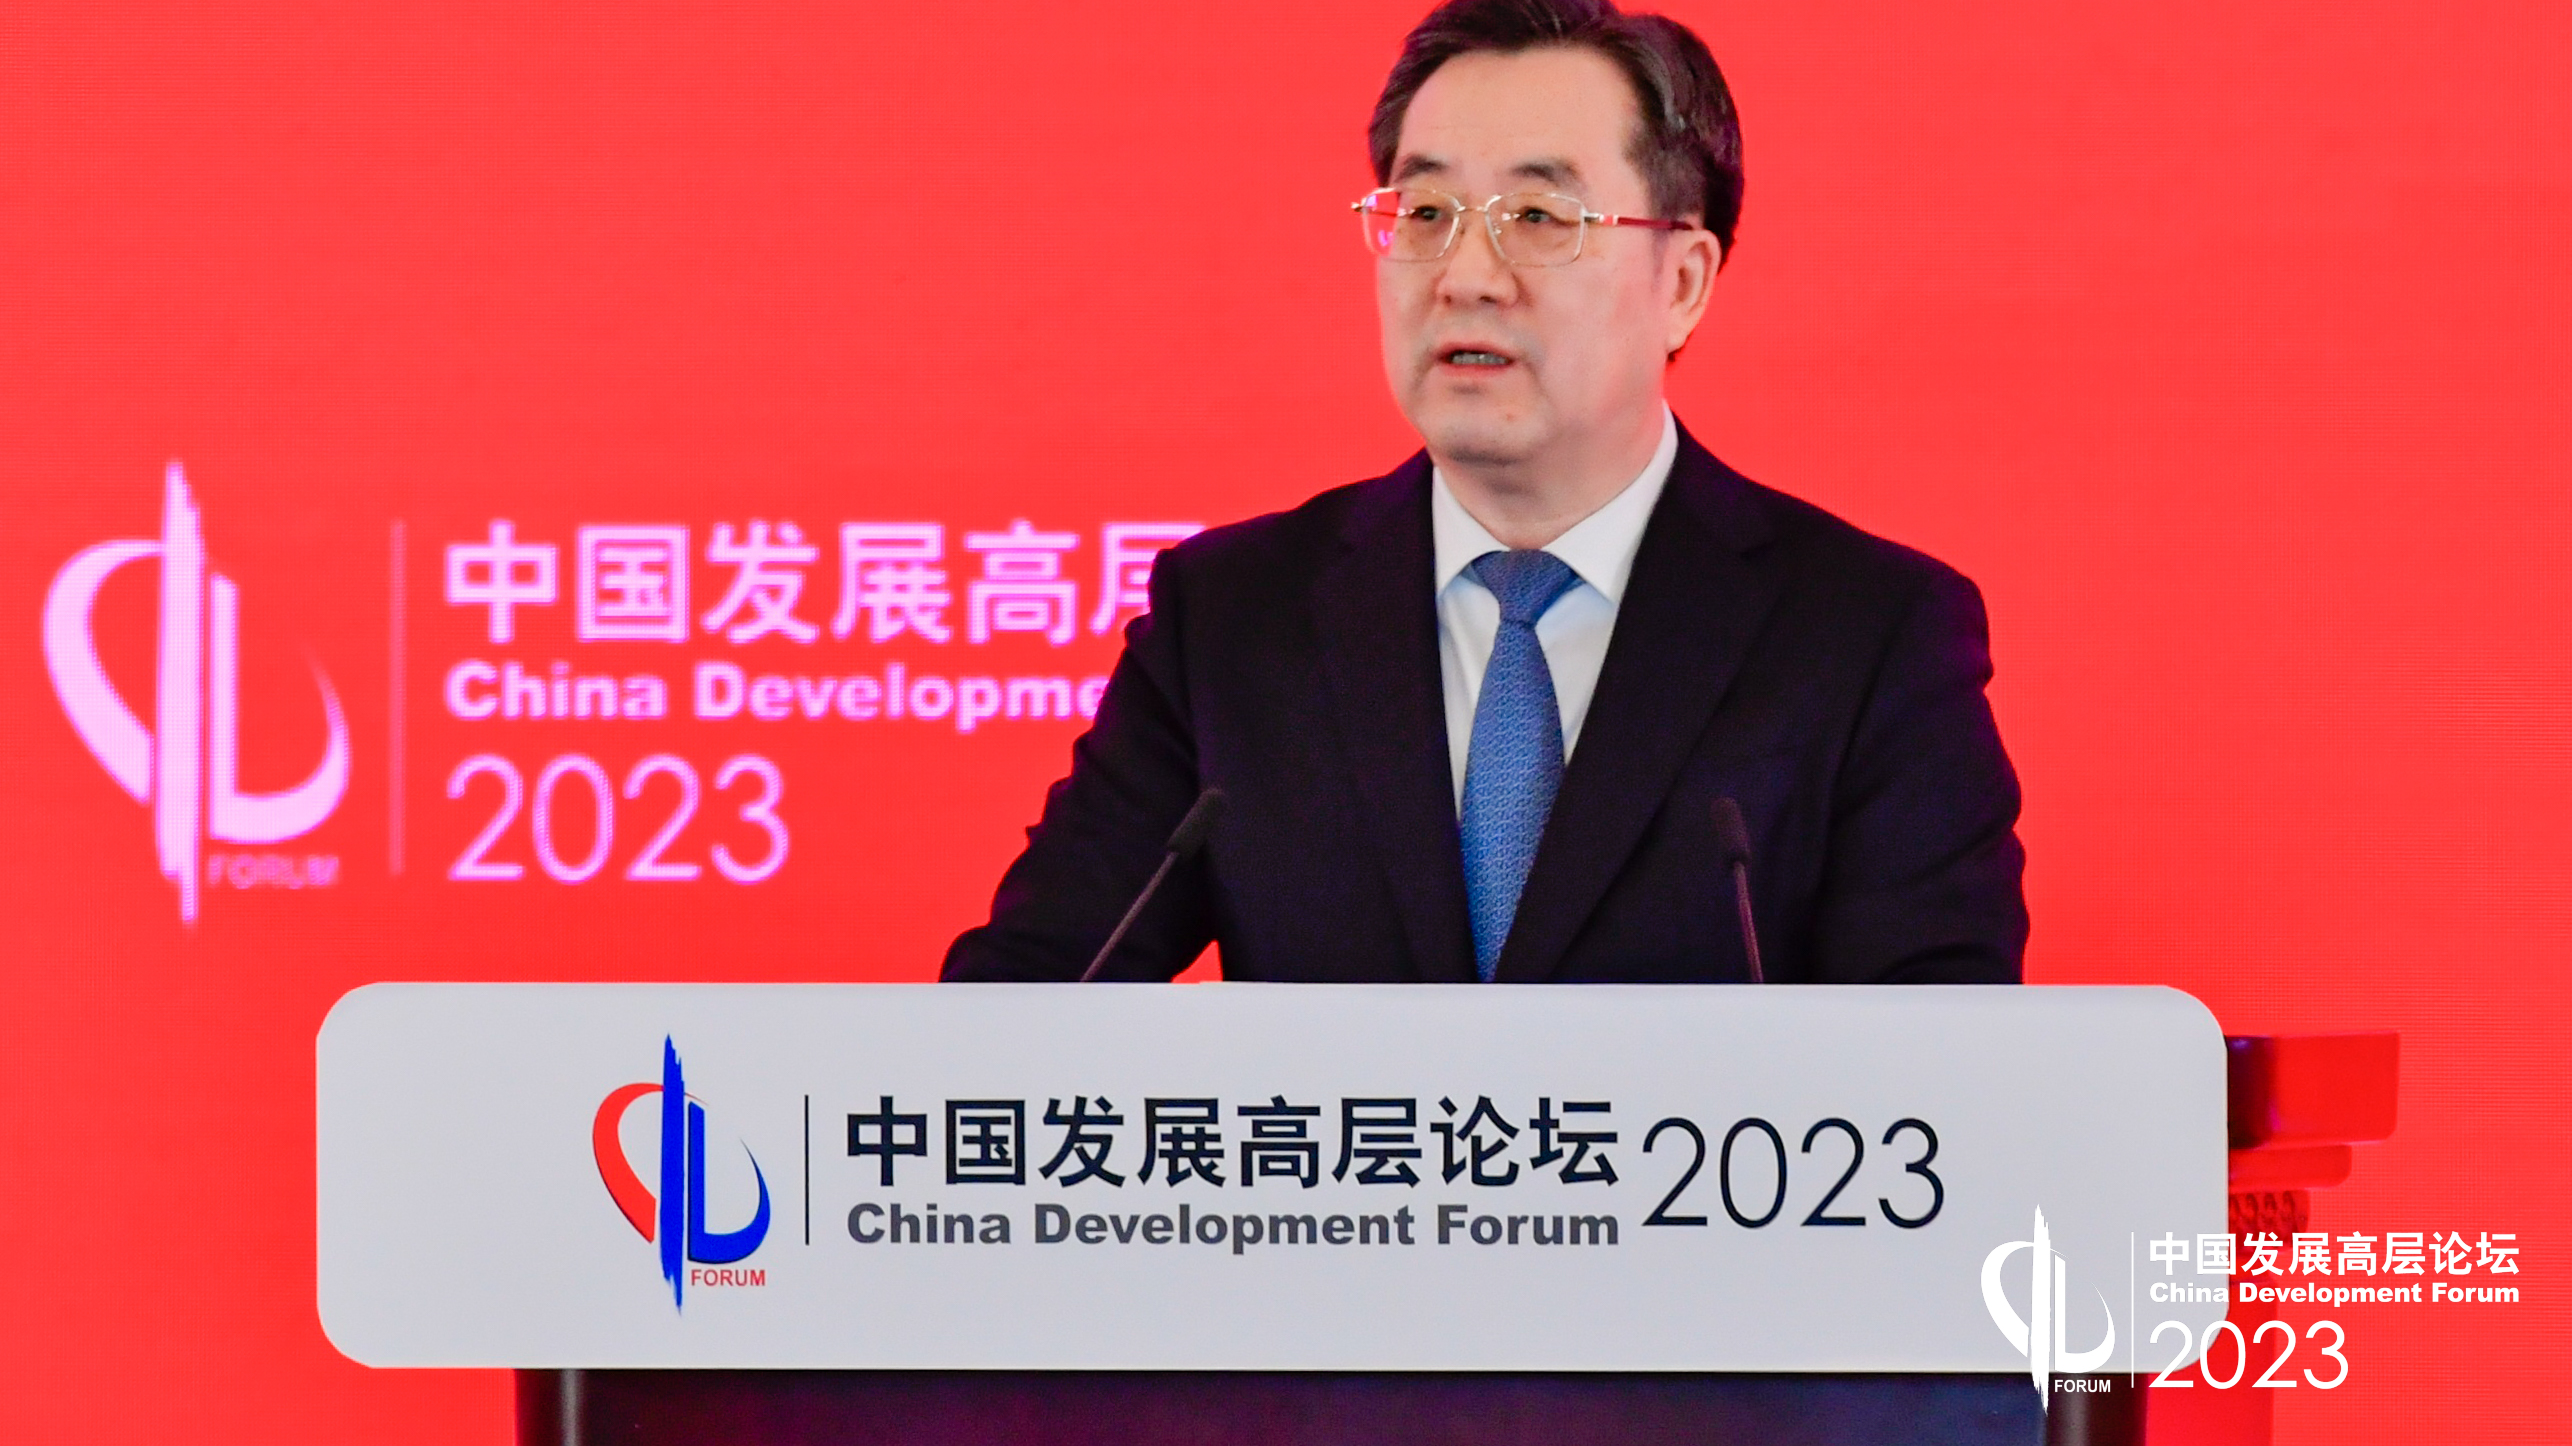 Chinese Vice Premier Ding Xuexiang made keynote speech at China Development Forum 2023, March 26, 2023. /CDF